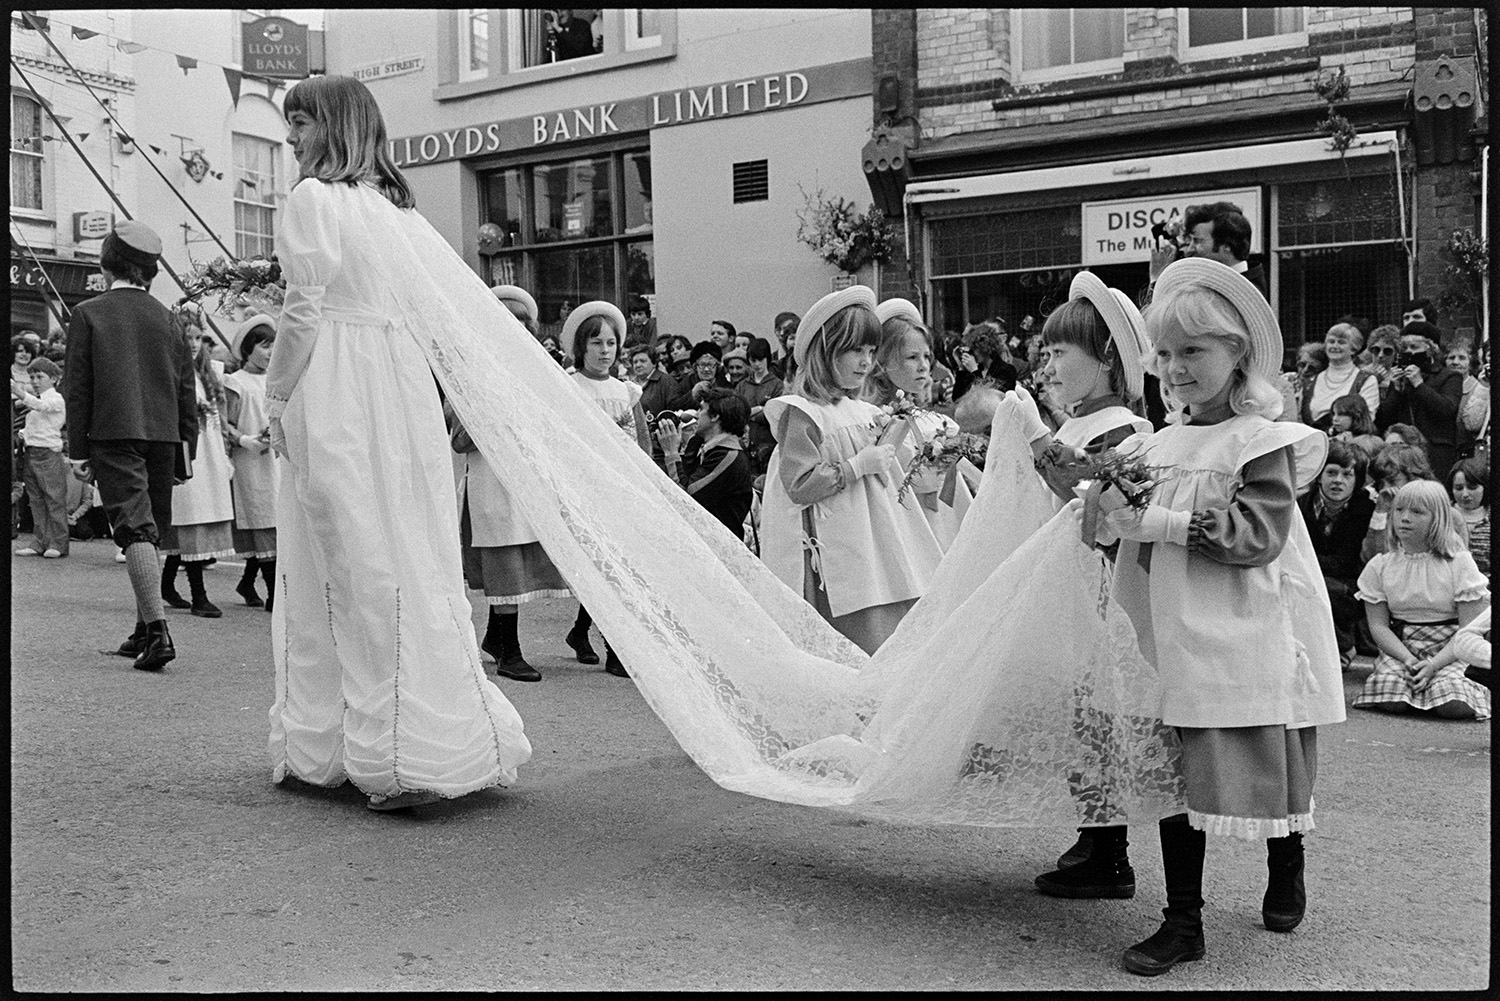 May Queen and Crowner processing to maypole, posing for photographers. 
[The May Queen and her attendants processing to the maypole for her to be crowned at Torrington Mayfair. Two of the attendants are holding the train of her dress. Spectators are watching from the side of the street outside Lloyds Bank.]